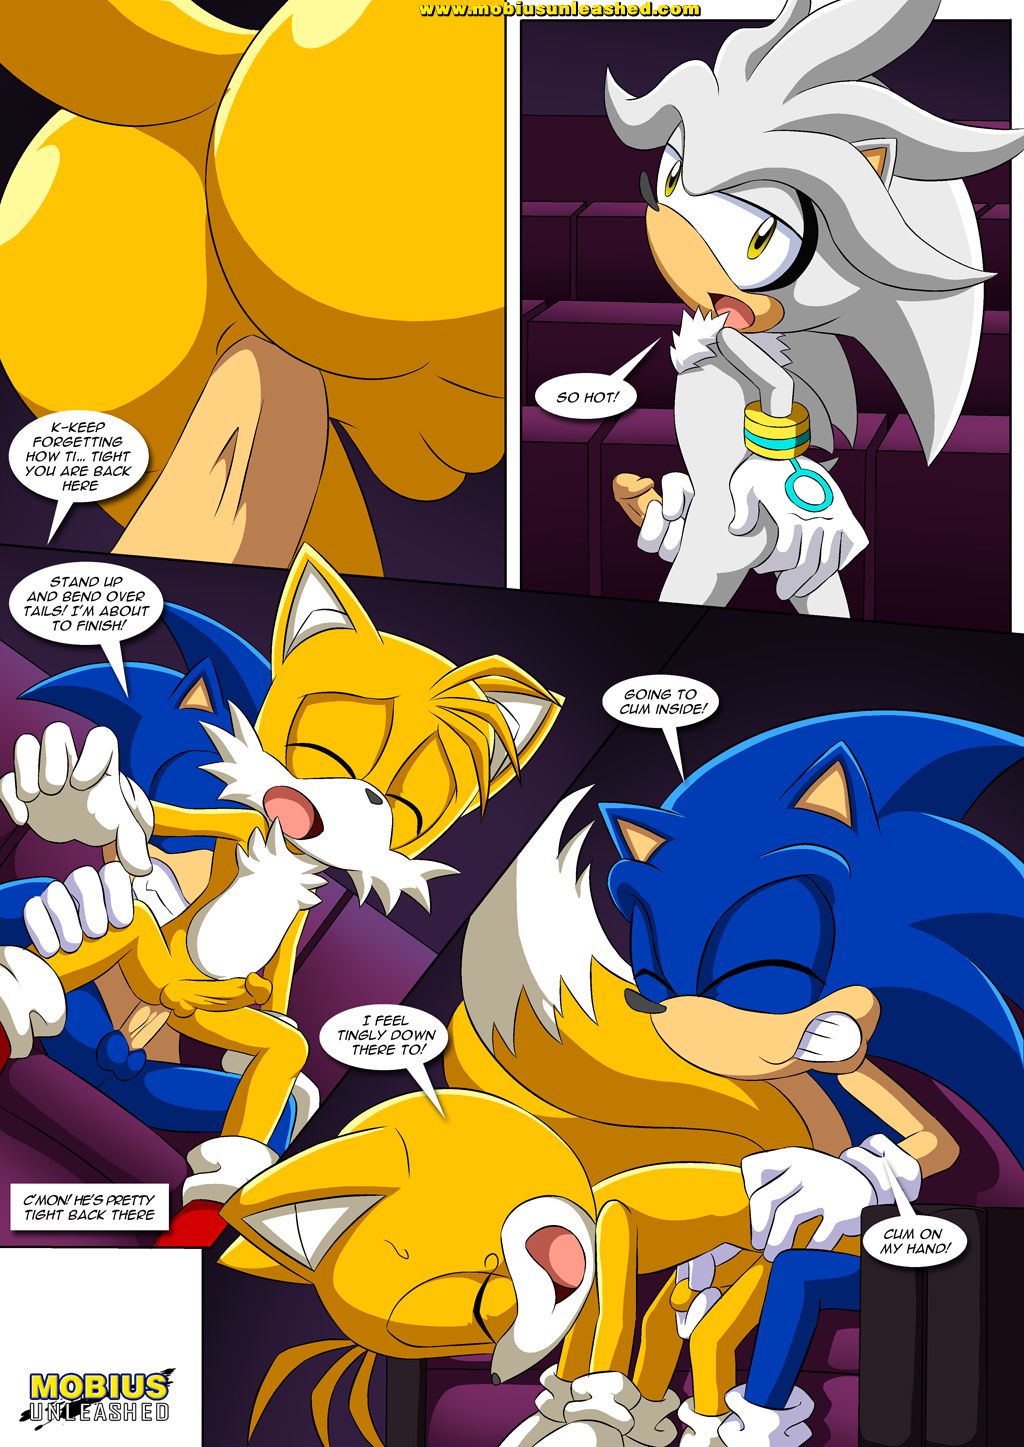 [Palcomix] The Pact 2 (Sonic The Hedgehog) [Ongoing] 6